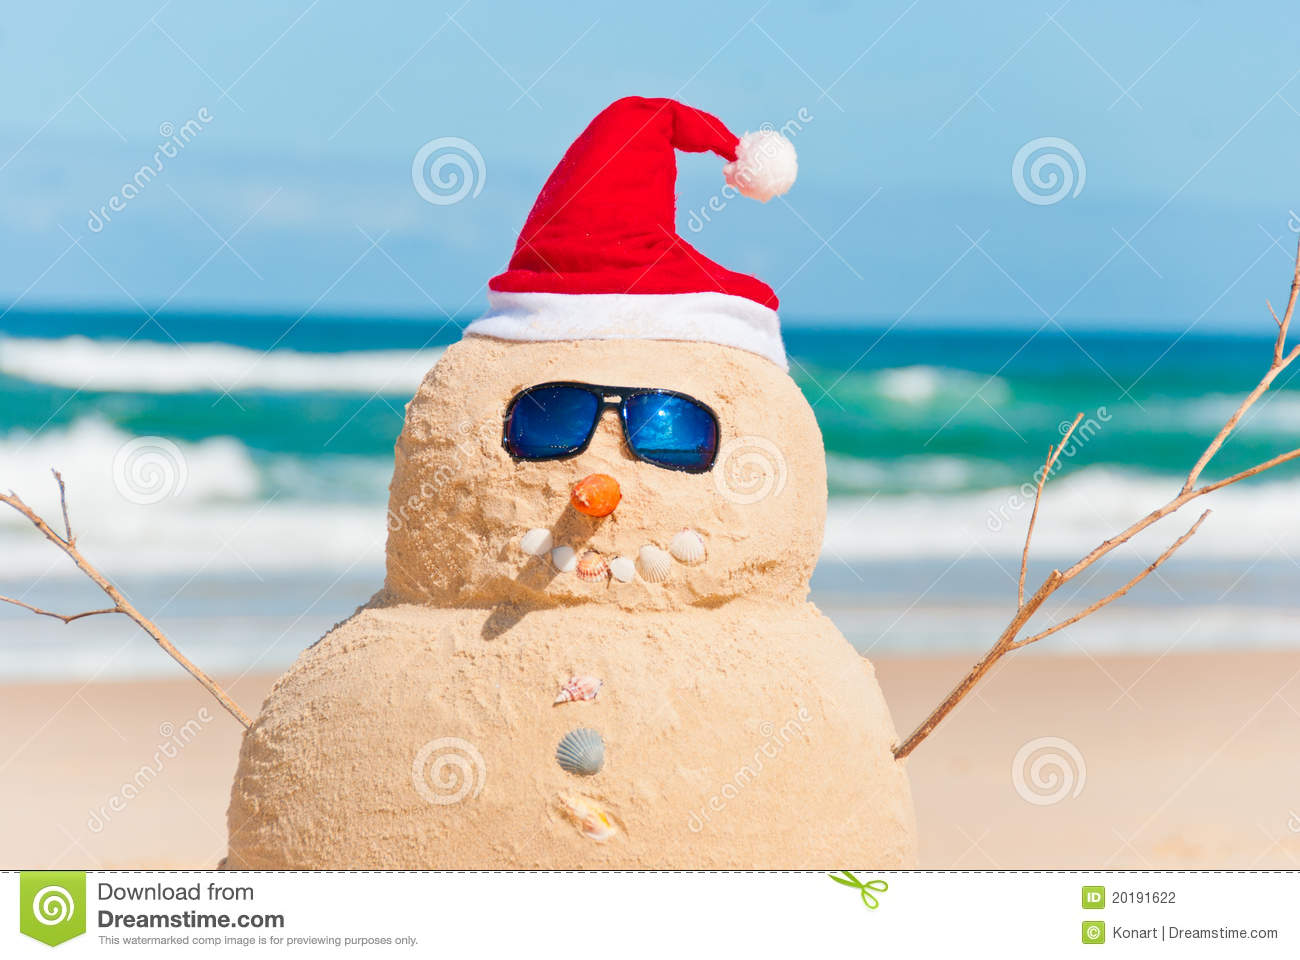 Snowman Made Out Of Sand With Santa Hat Stock Photography   Image    